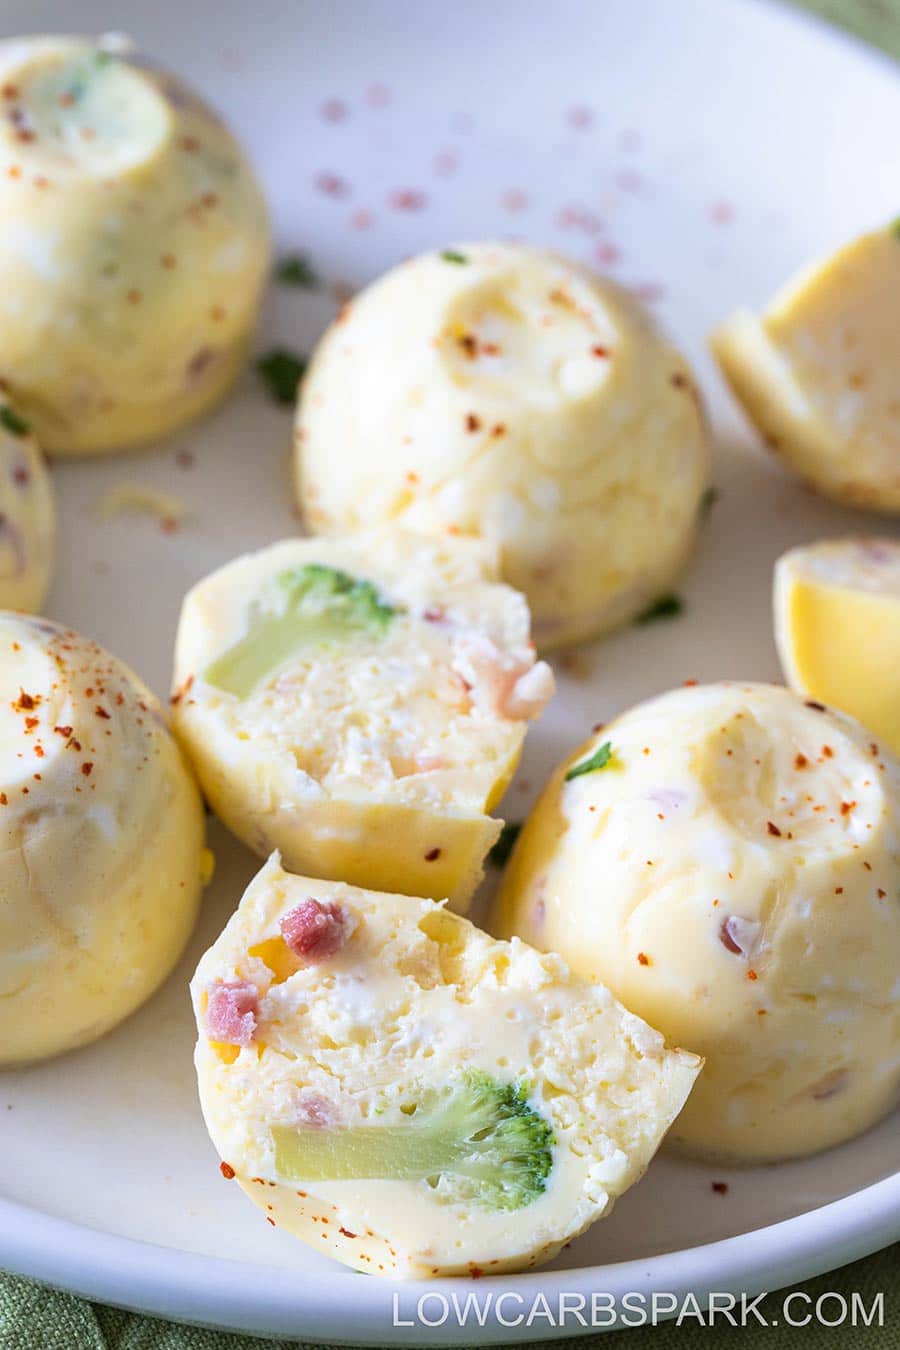 Discover how easy it is to make this delectable Instant Pot Egg Bites recipe. These copycat sous vide egg bites are soft, velvety smooth, delicious, and easy to eat on the go for breakfast.And the best thing is that they are naturally low carb and keto-friendly.